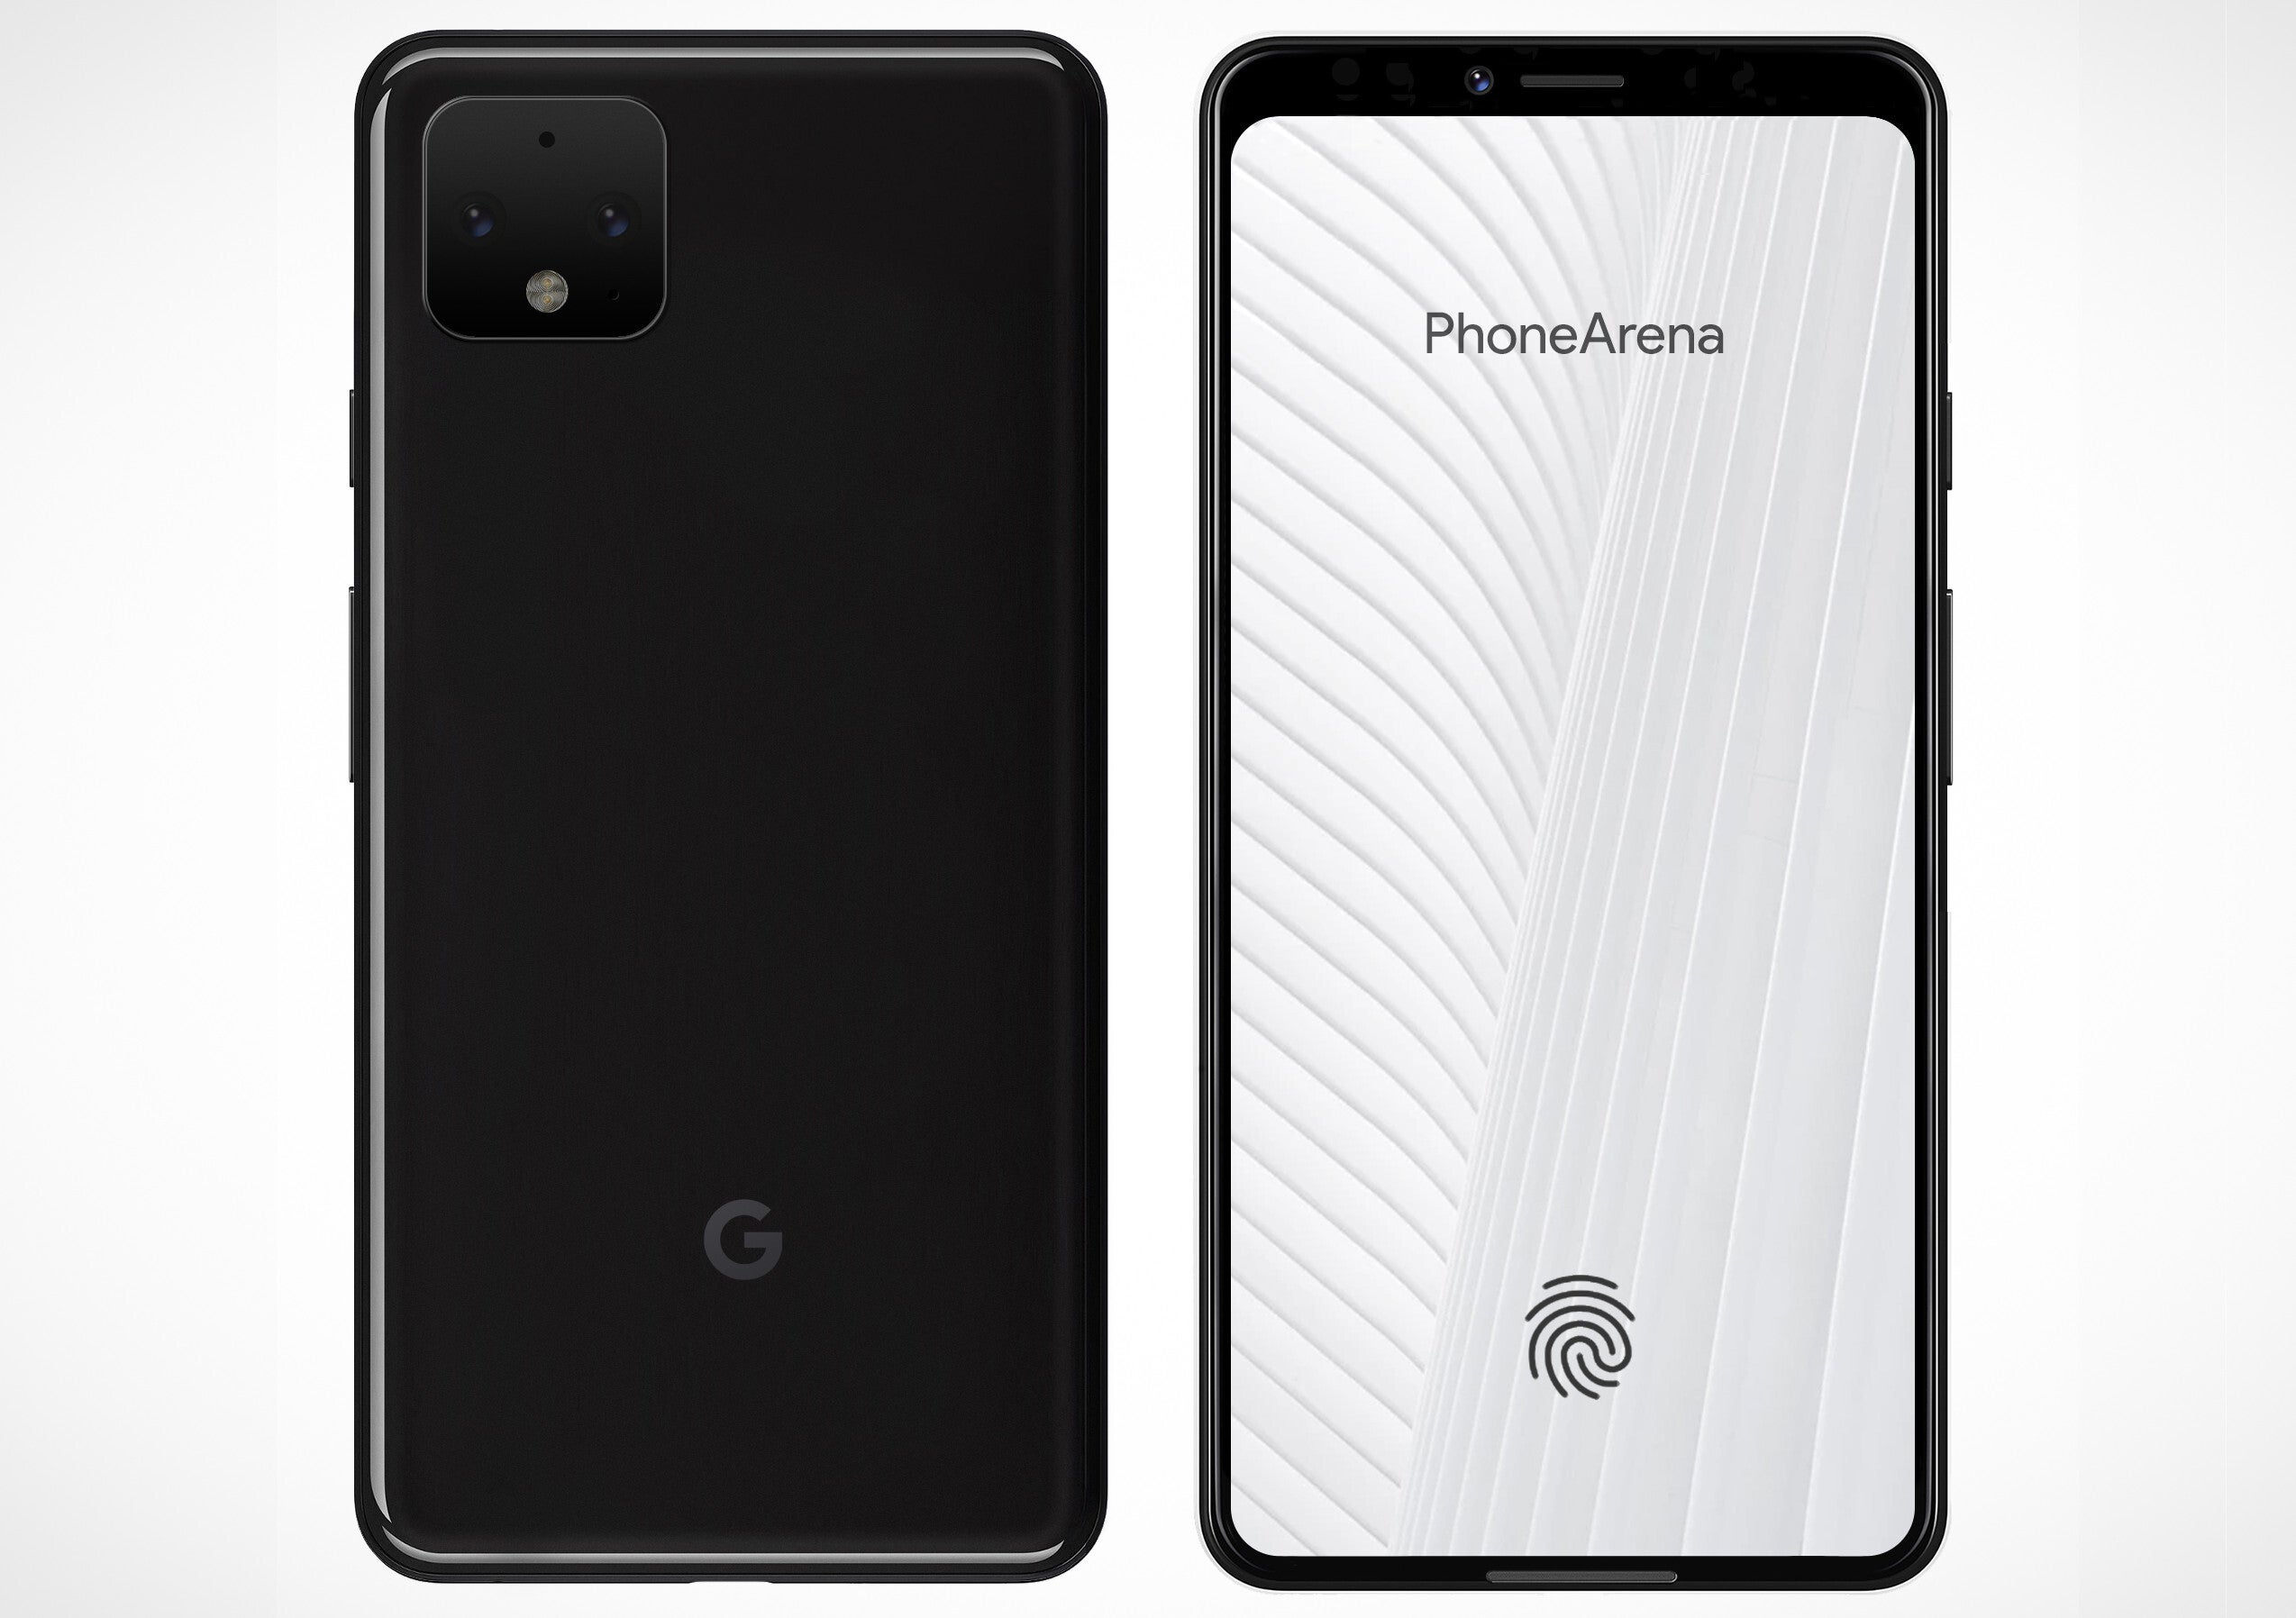 Pixel 4 render made by us - based on details shared by Google, plus rumors - Google indirectly confirms the Pixel 4 and 4 XL won&#039;t be released before October 18